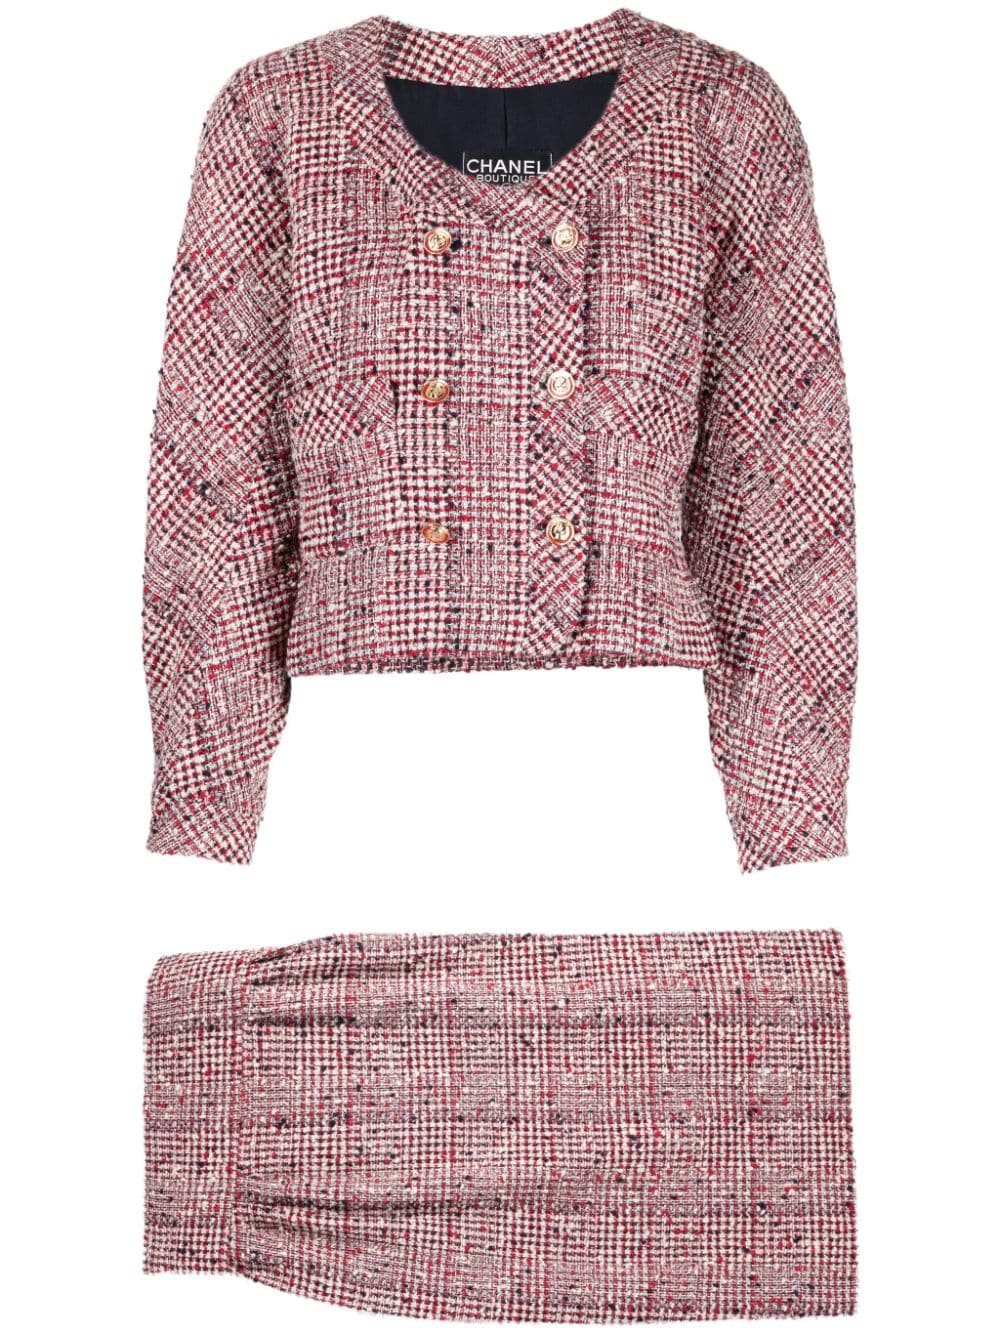 Image 1 of CHANEL Pre-Owned 1993 double-breasted tweed skirt suit